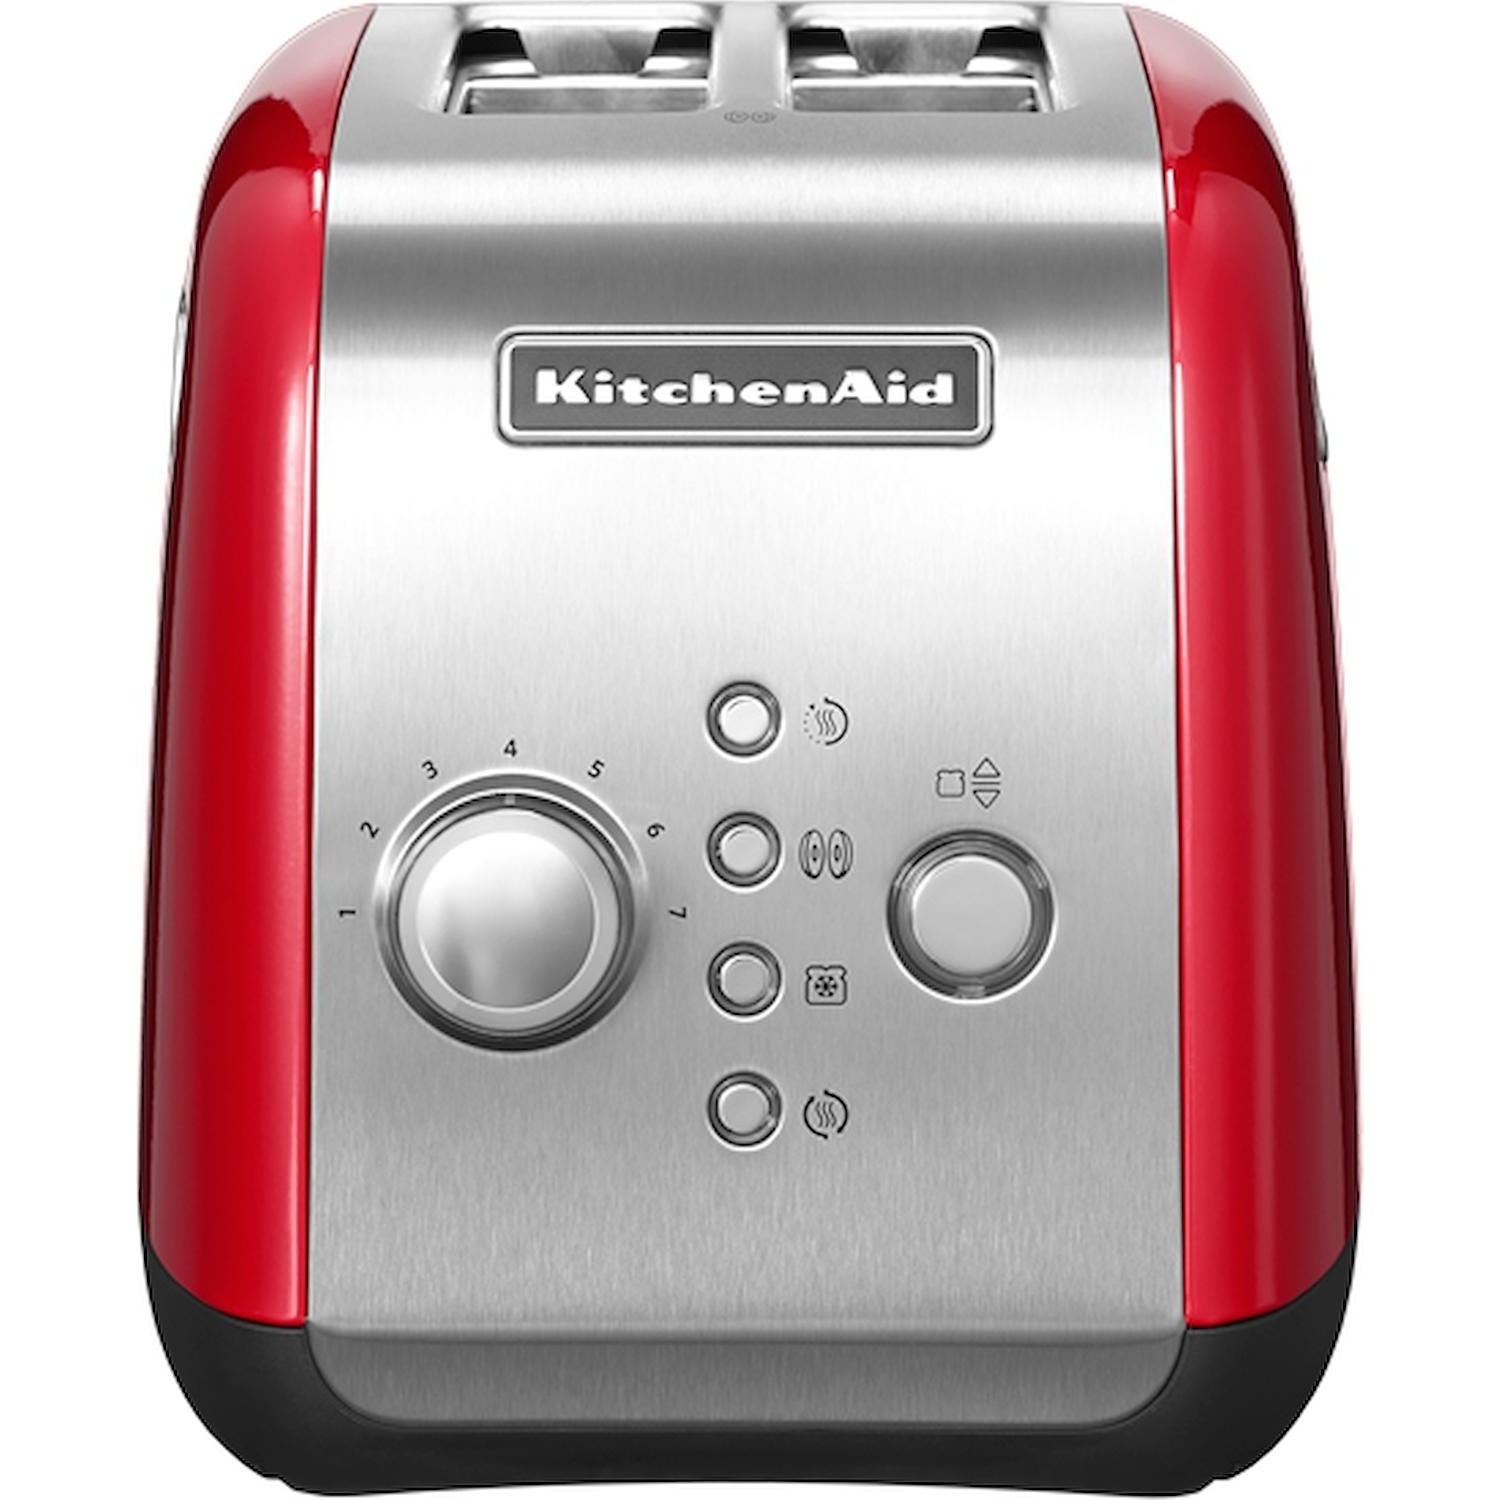 Tostapane KitchenAid 5KMT221EER rosso imperiale - DIMOStore